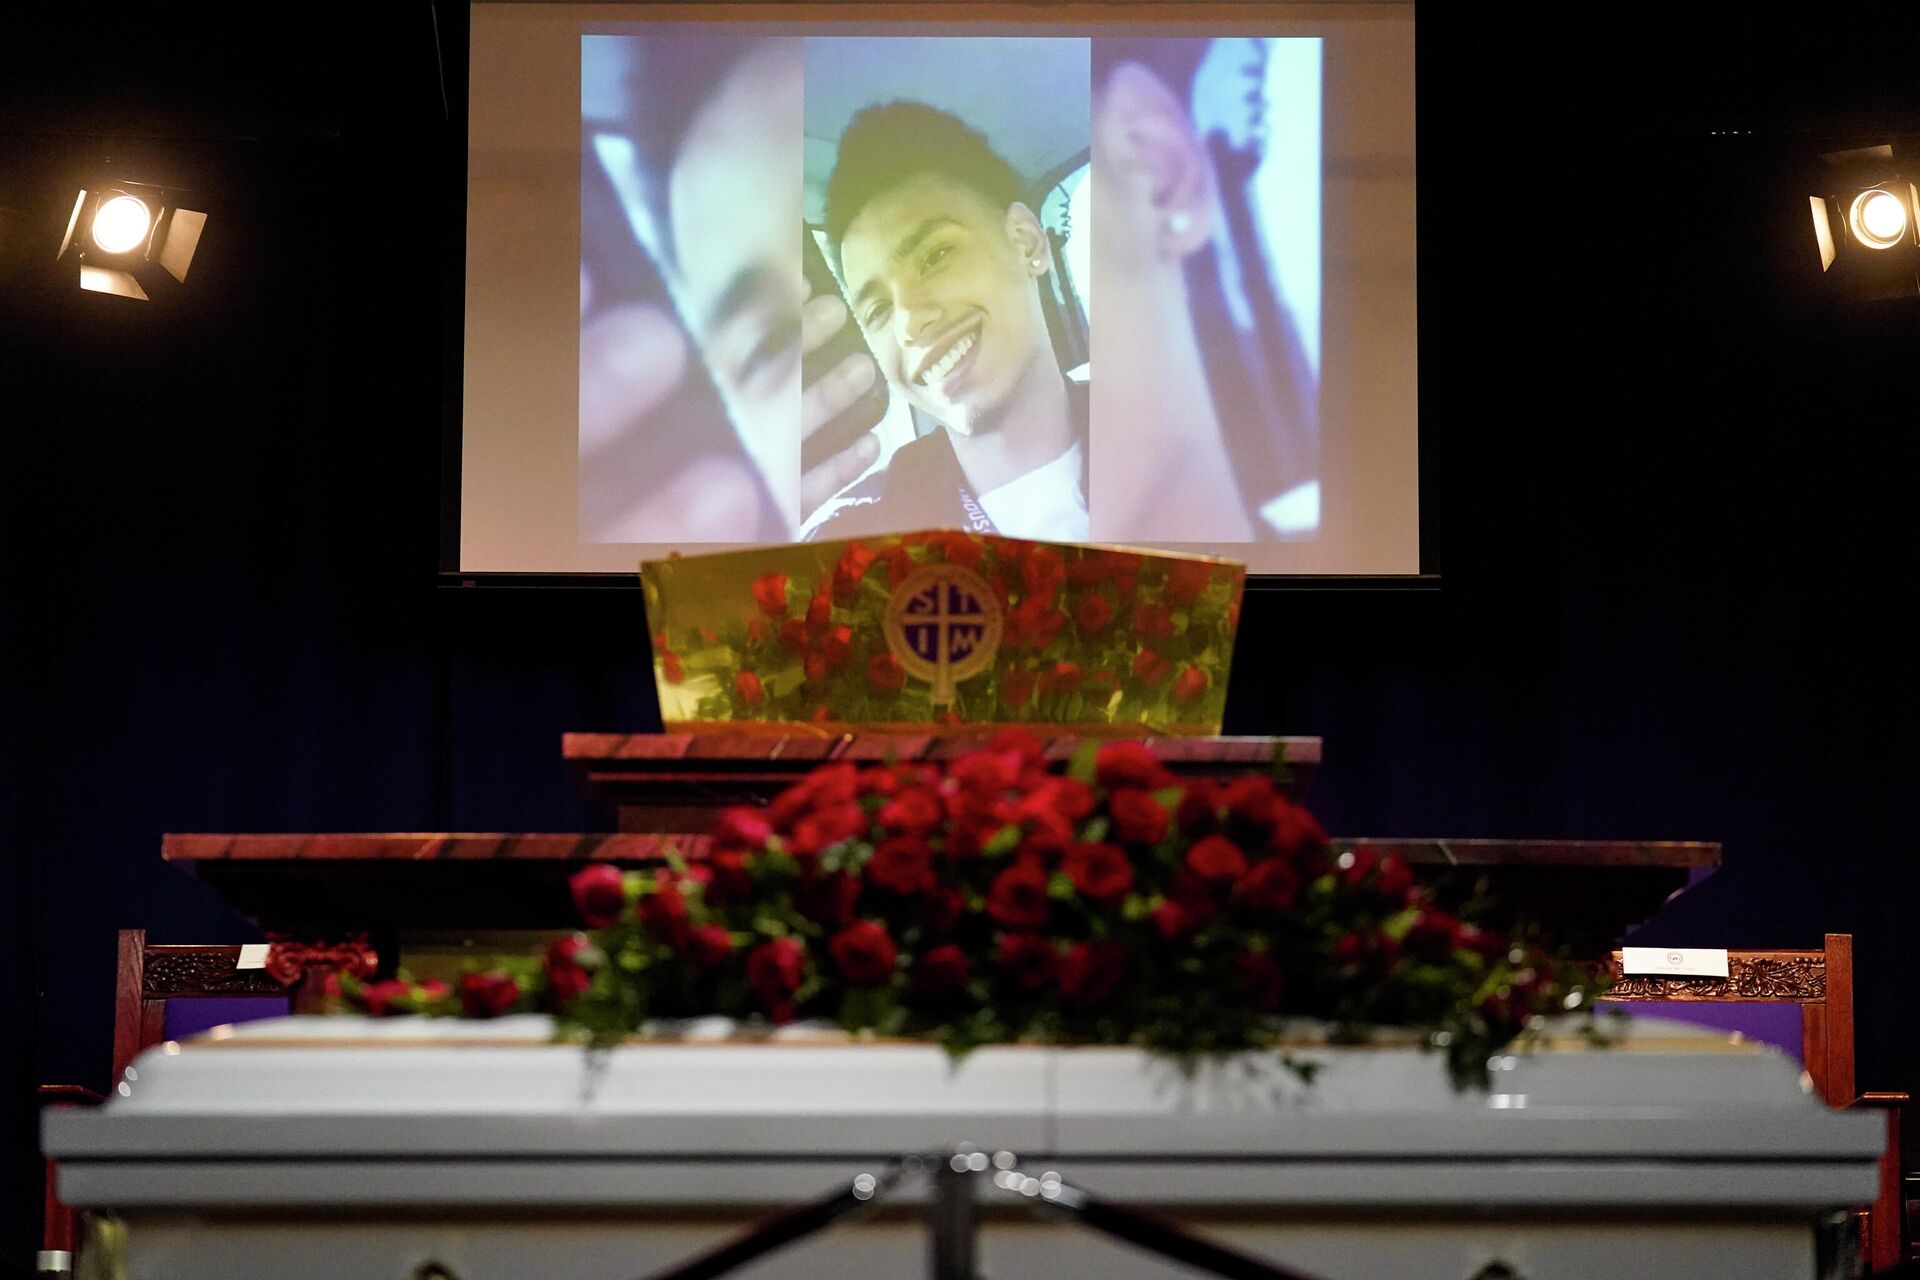 Family images play on a screen before funeral services for Daunte Wright at Shiloh Temple International Ministries in Minneapolis, Thursday, April 22, 2021. Wright, 20, was fatally shot by a Brooklyn Center, Minn., police officer during a traffic stop. - Sputnik International, 1920, 23.12.2021